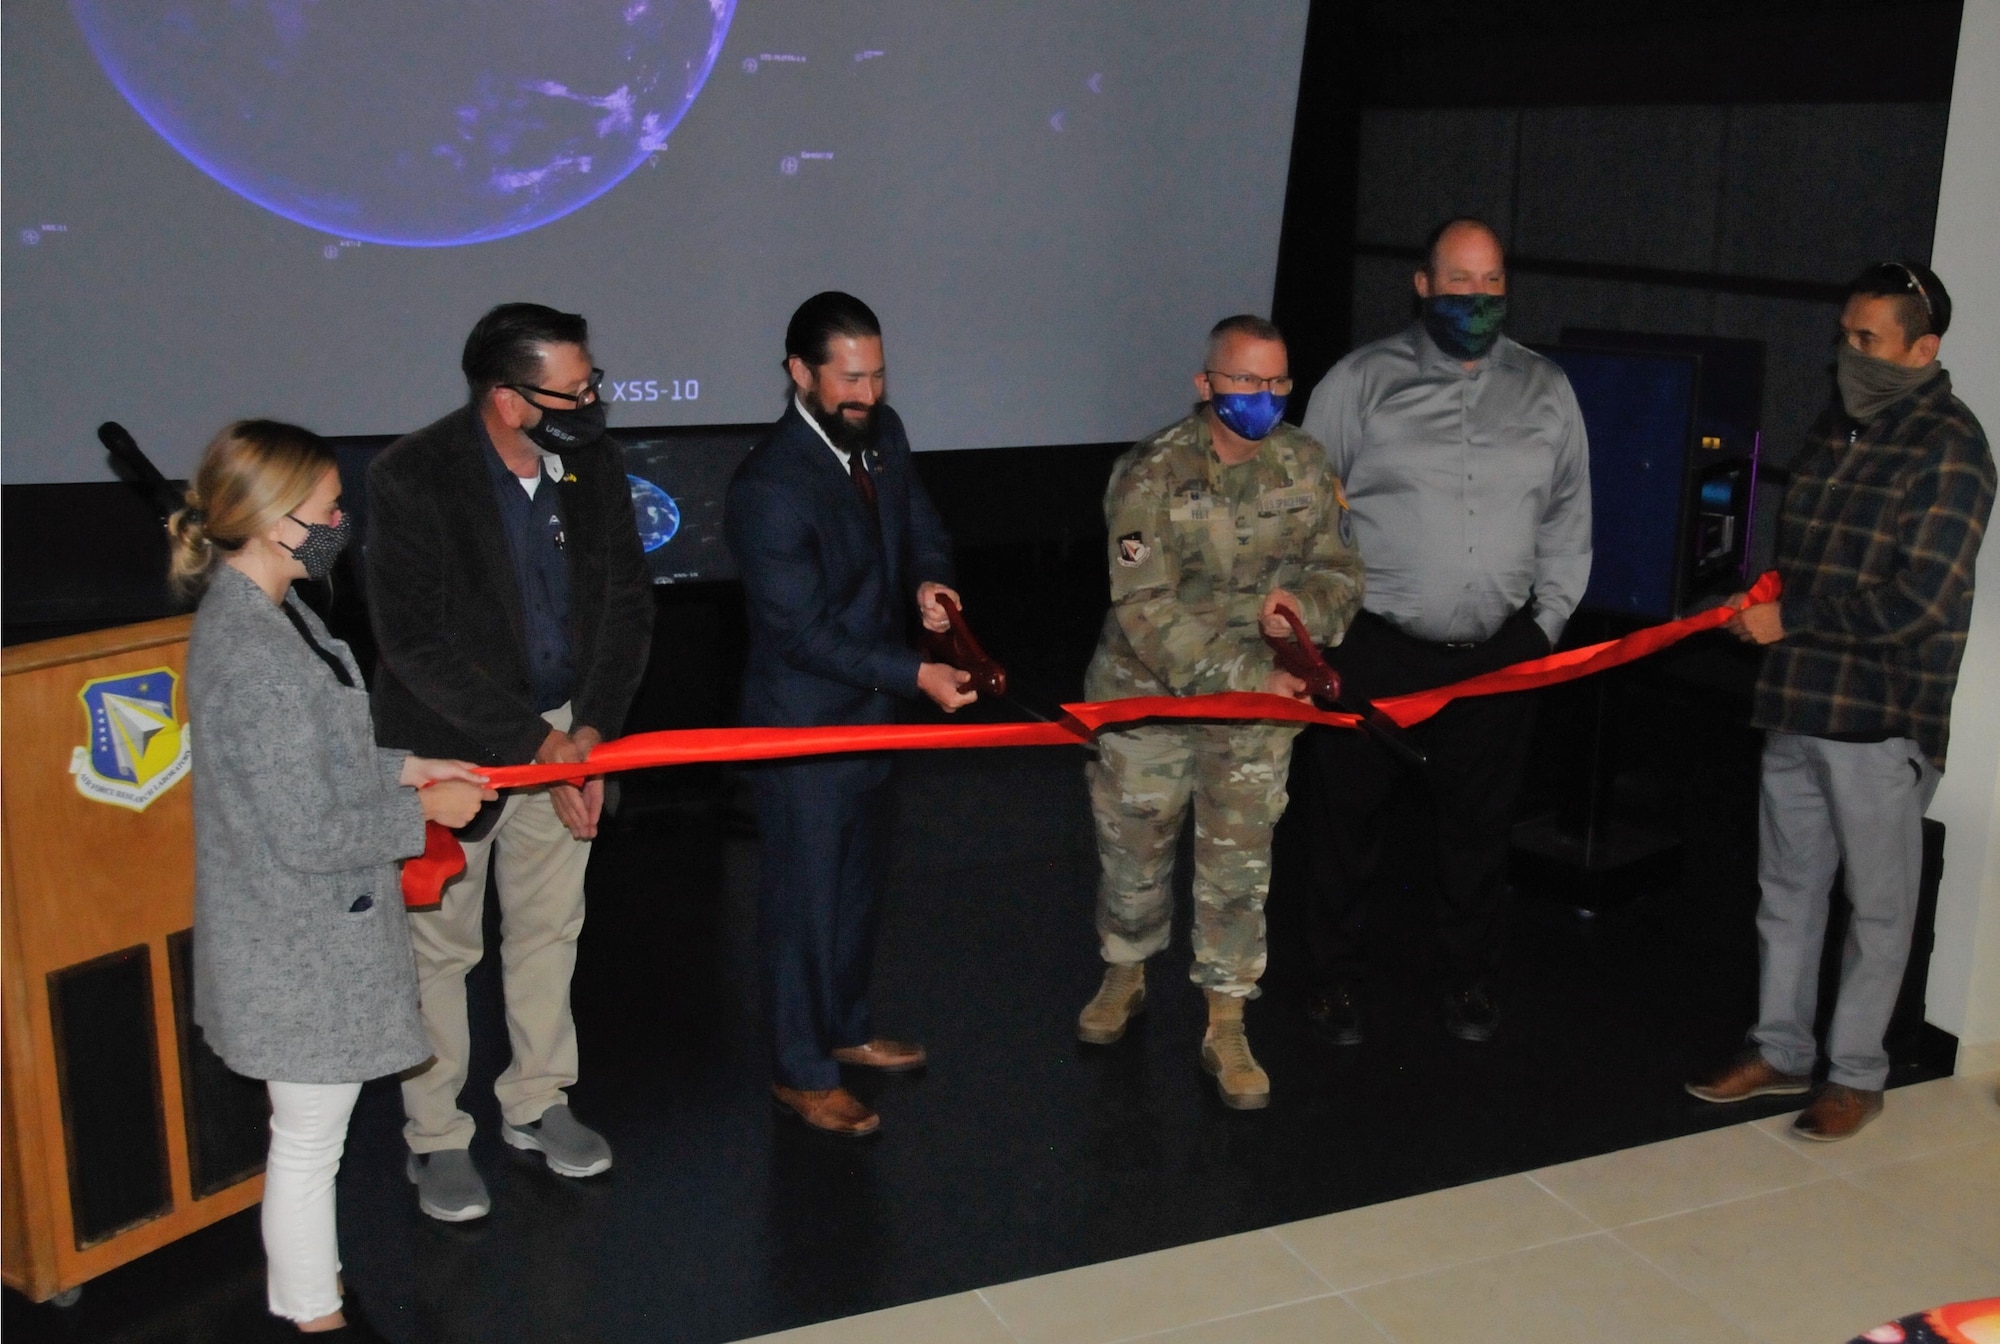 Col. Eric Felt, director of the Air Force Research Laboratory Space Vehicles Directorate and Dr. Darren Raspa, AFRL Phillips Research Site historian, cut the ribbon to open the directorate’s Legacy Portal Mission Control exhibit, at a ceremony held Nov. 15, 2021 at Kirtland AFB, N.M. Supporting them left to right: Gina Gutierrez, project manager; Bradley Rieck, senior facility engineer; Dan Von Tom, chief of the Corporate Information Office; and Victor Mace, project coordinator. (U.S. Air Force photo/Arturo Cardona)